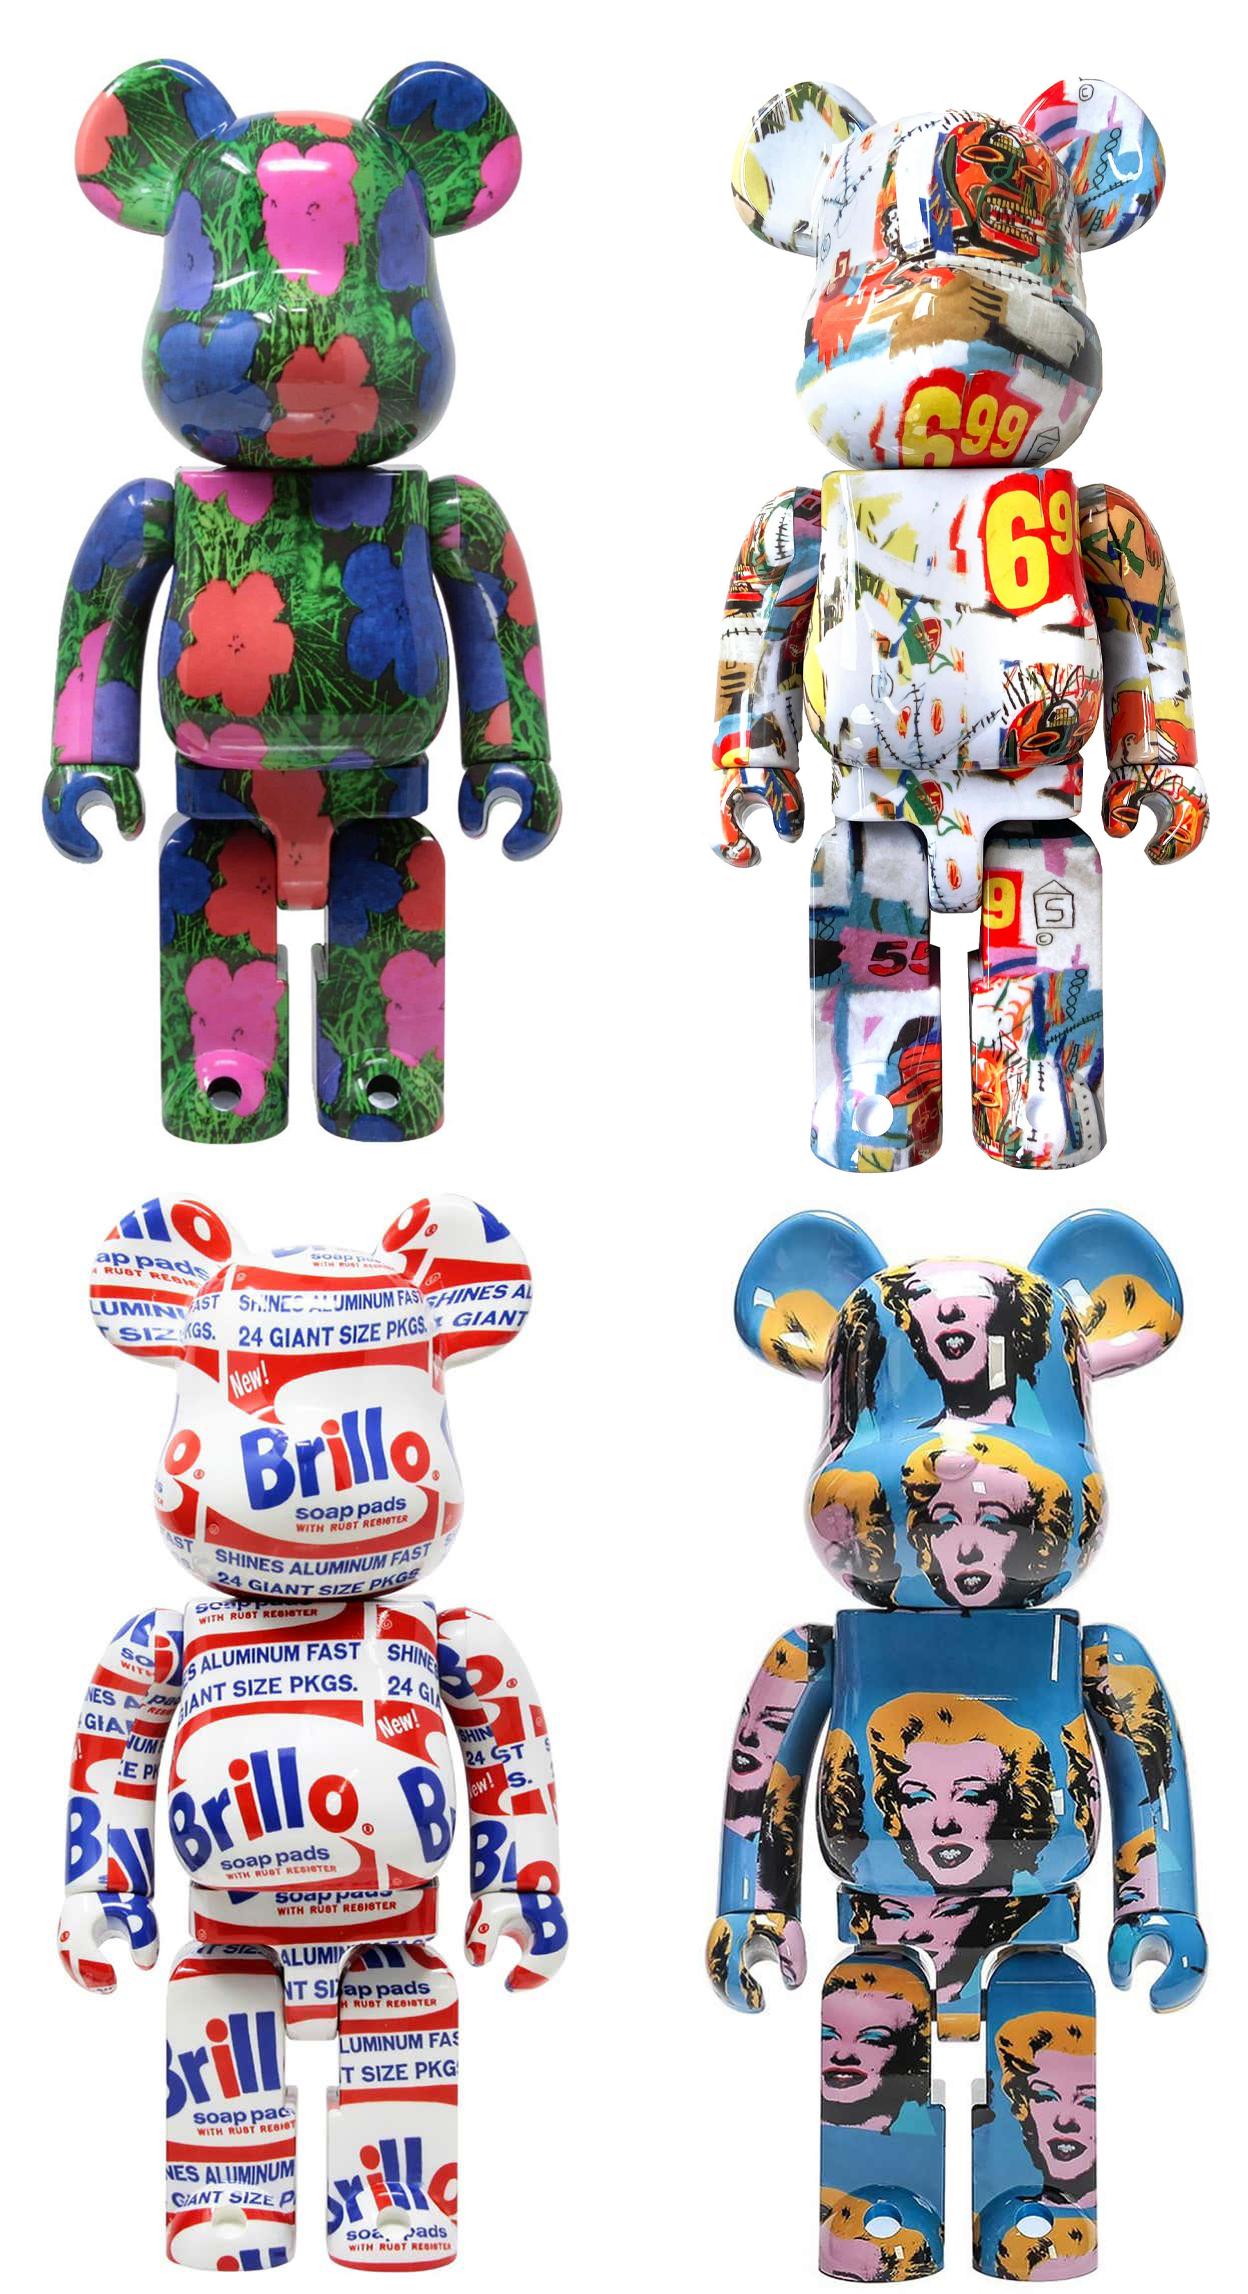 Andy Warhol Bearbrick 400% set of 4 works (Warhol BE@RBRICK) - Print by (after) Andy Warhol